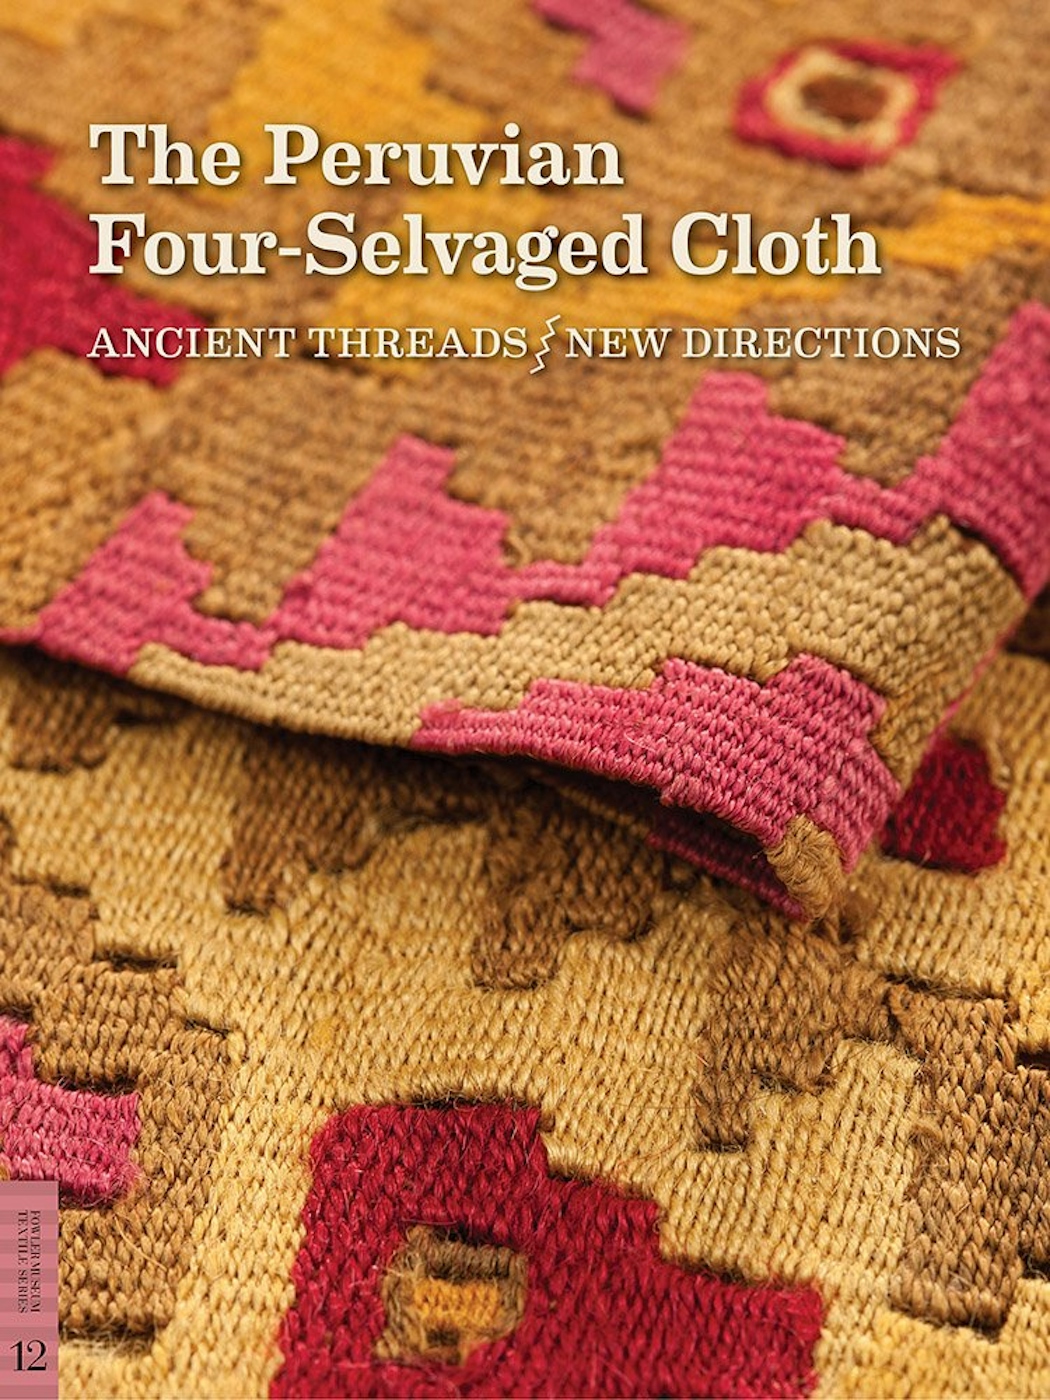 The Peruvian Four-Selvaged Cloth